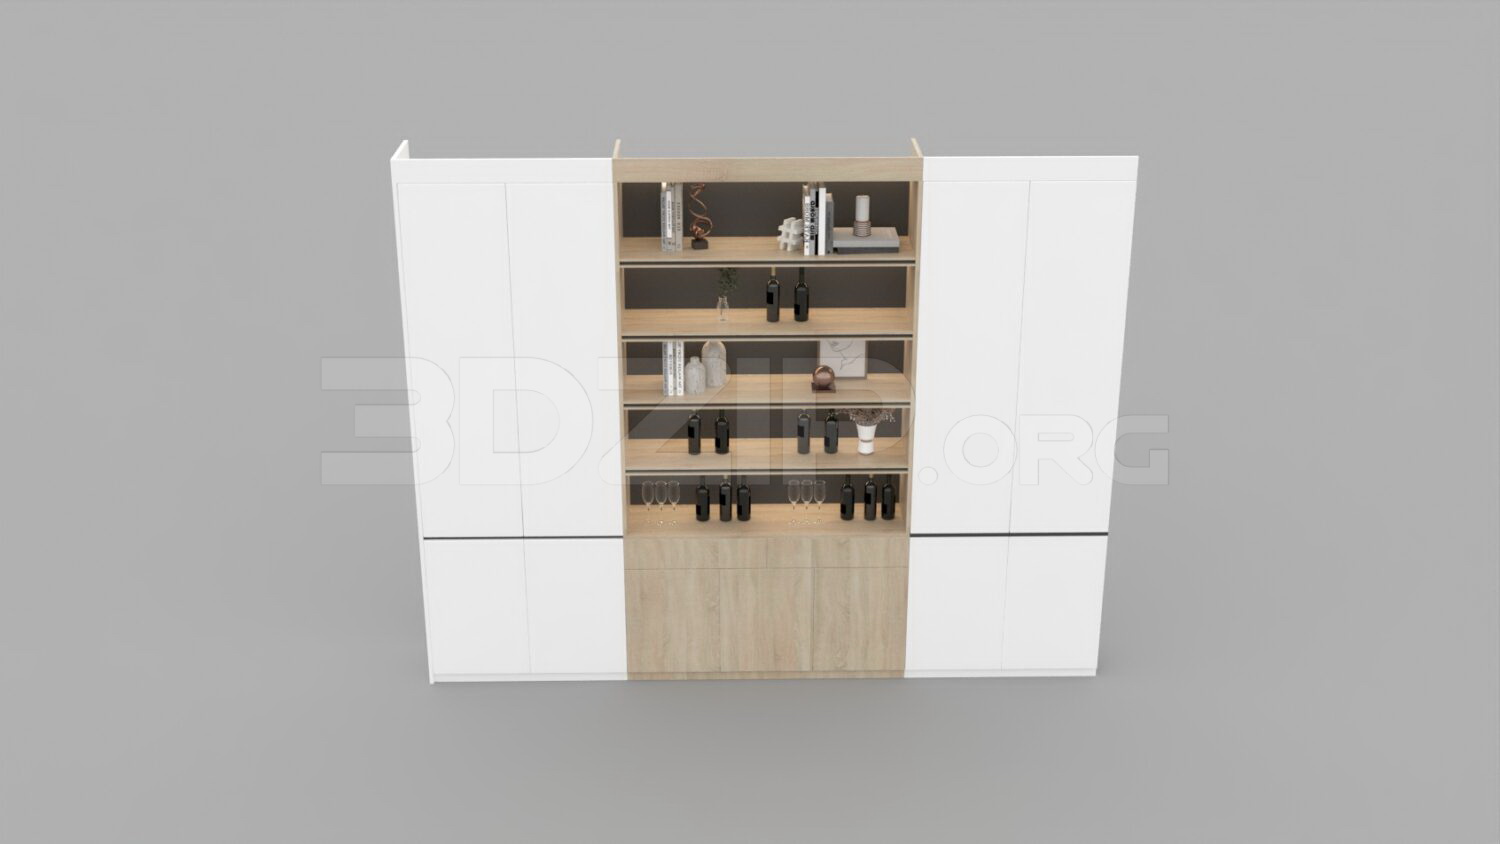 2574. Download Free Wine Cabinet Model By Dao Van Cuong